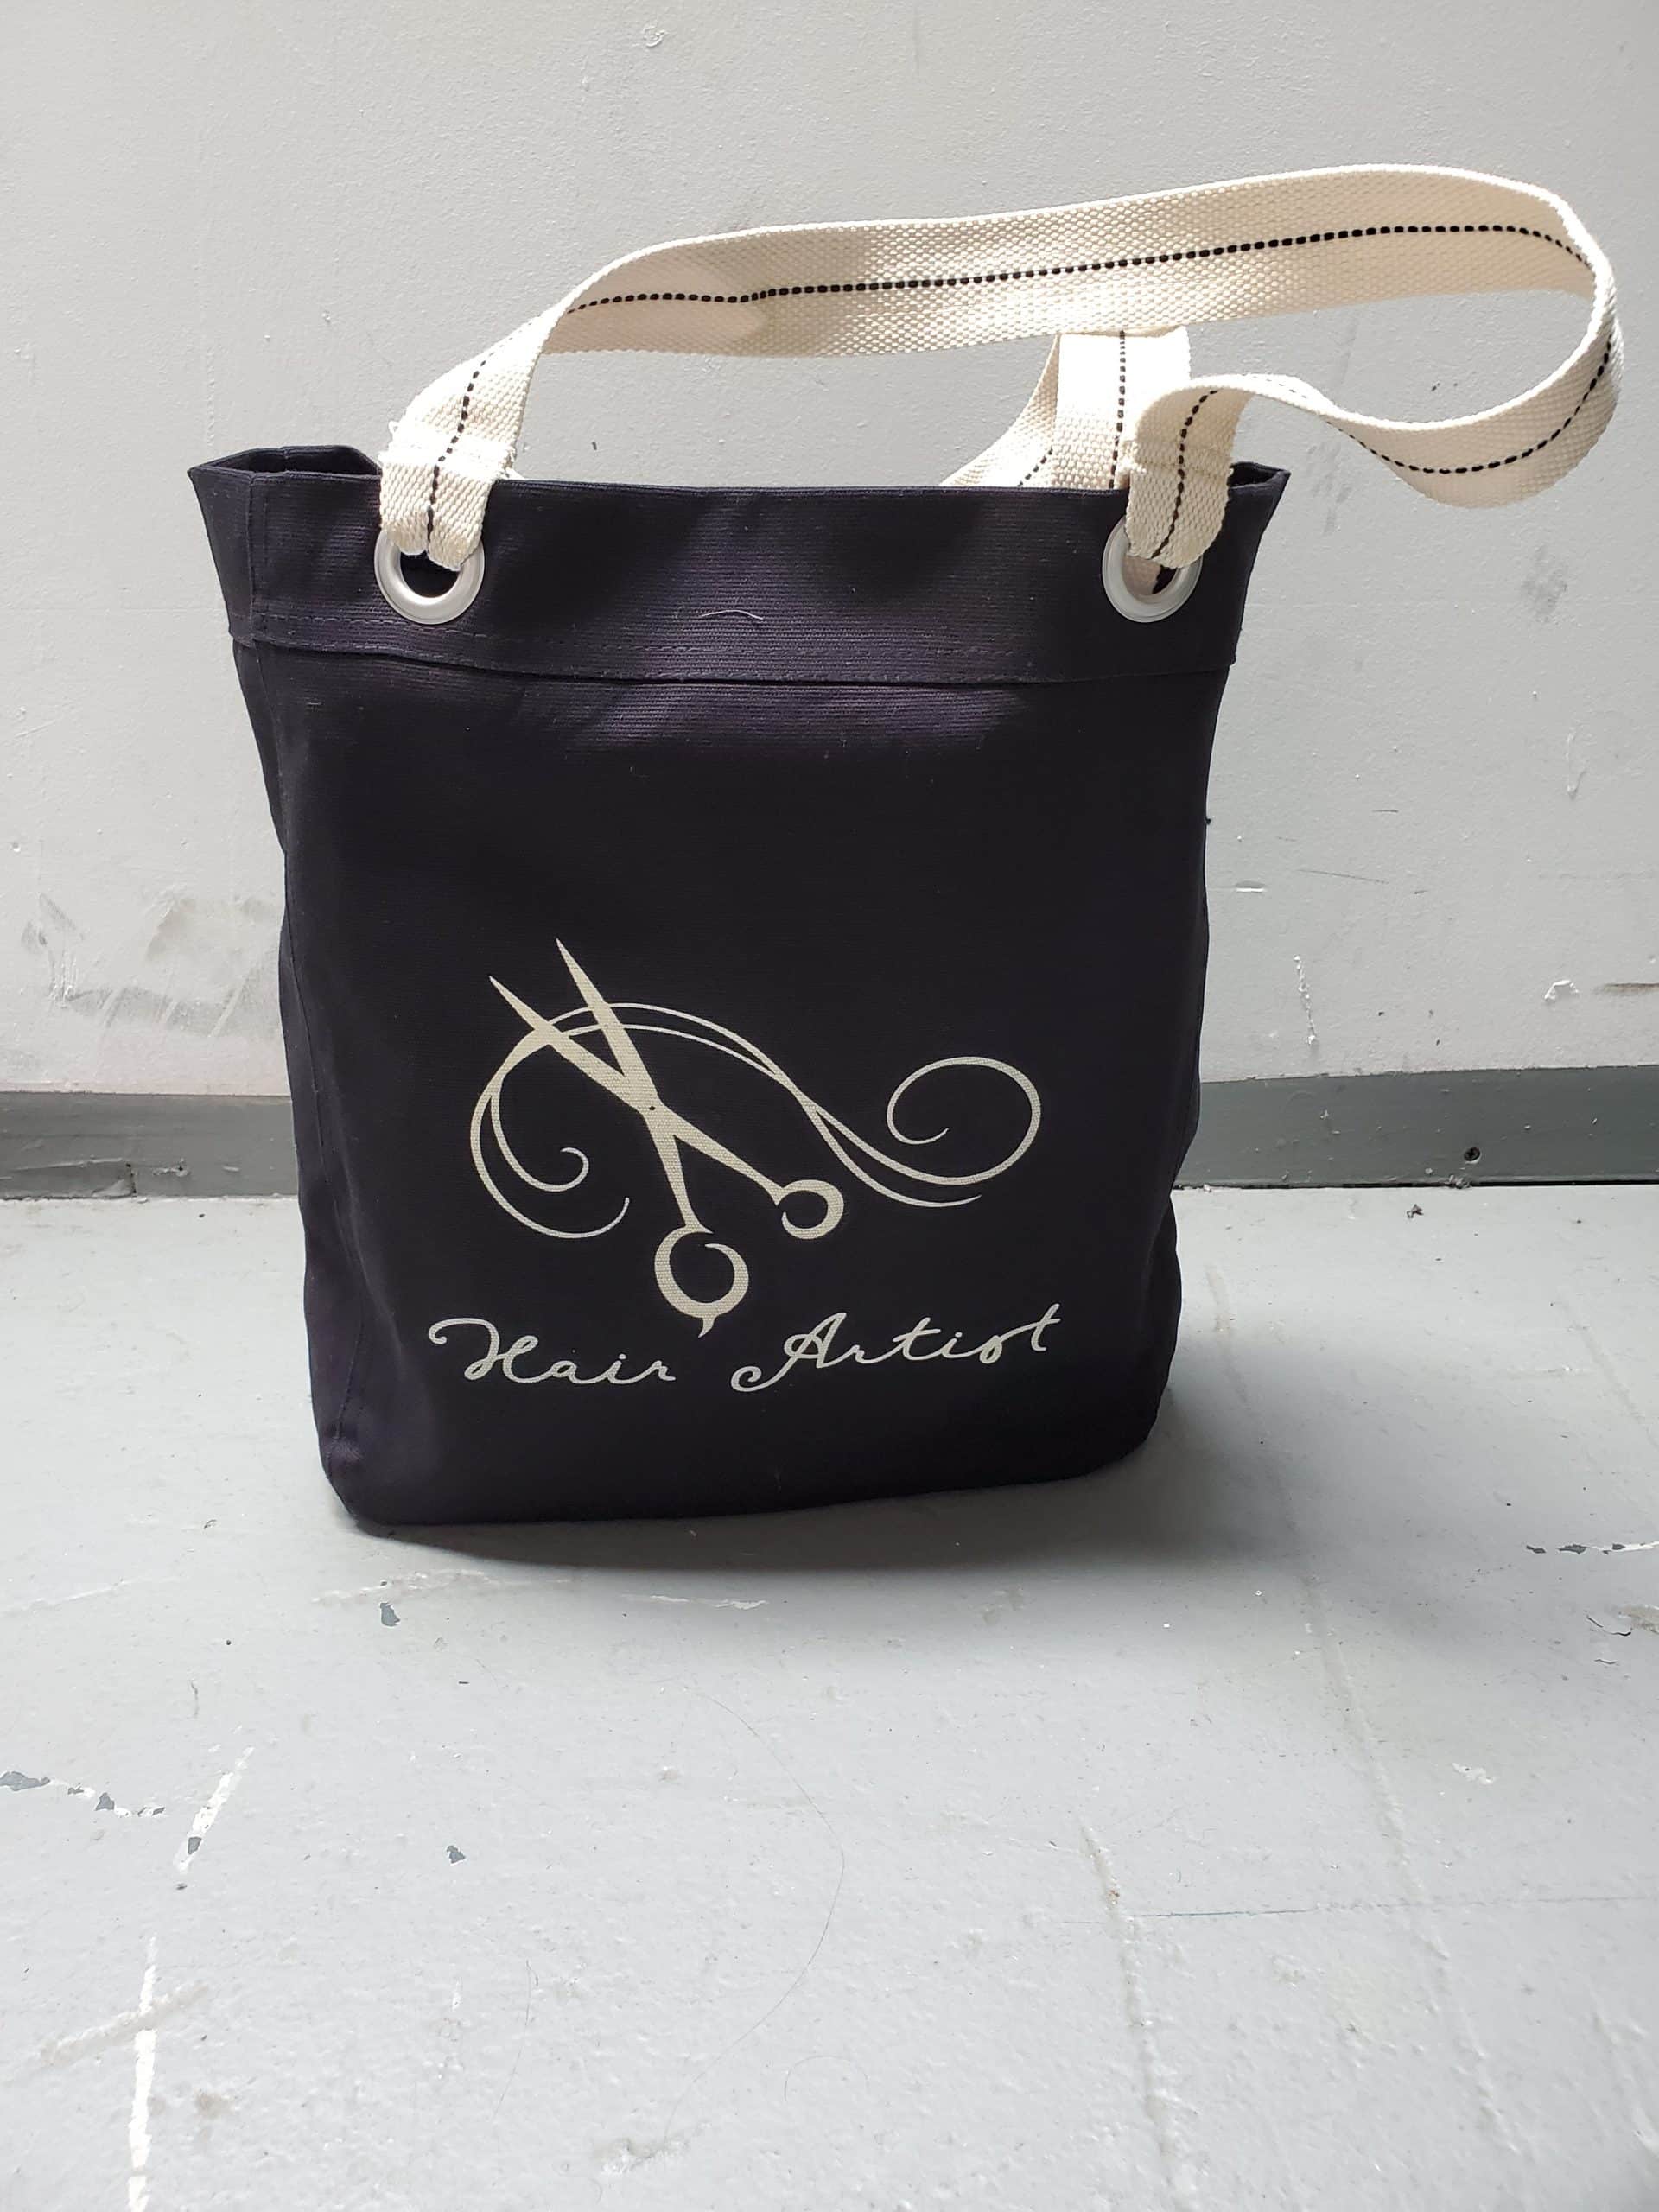 Hair Artist tote bags with printing